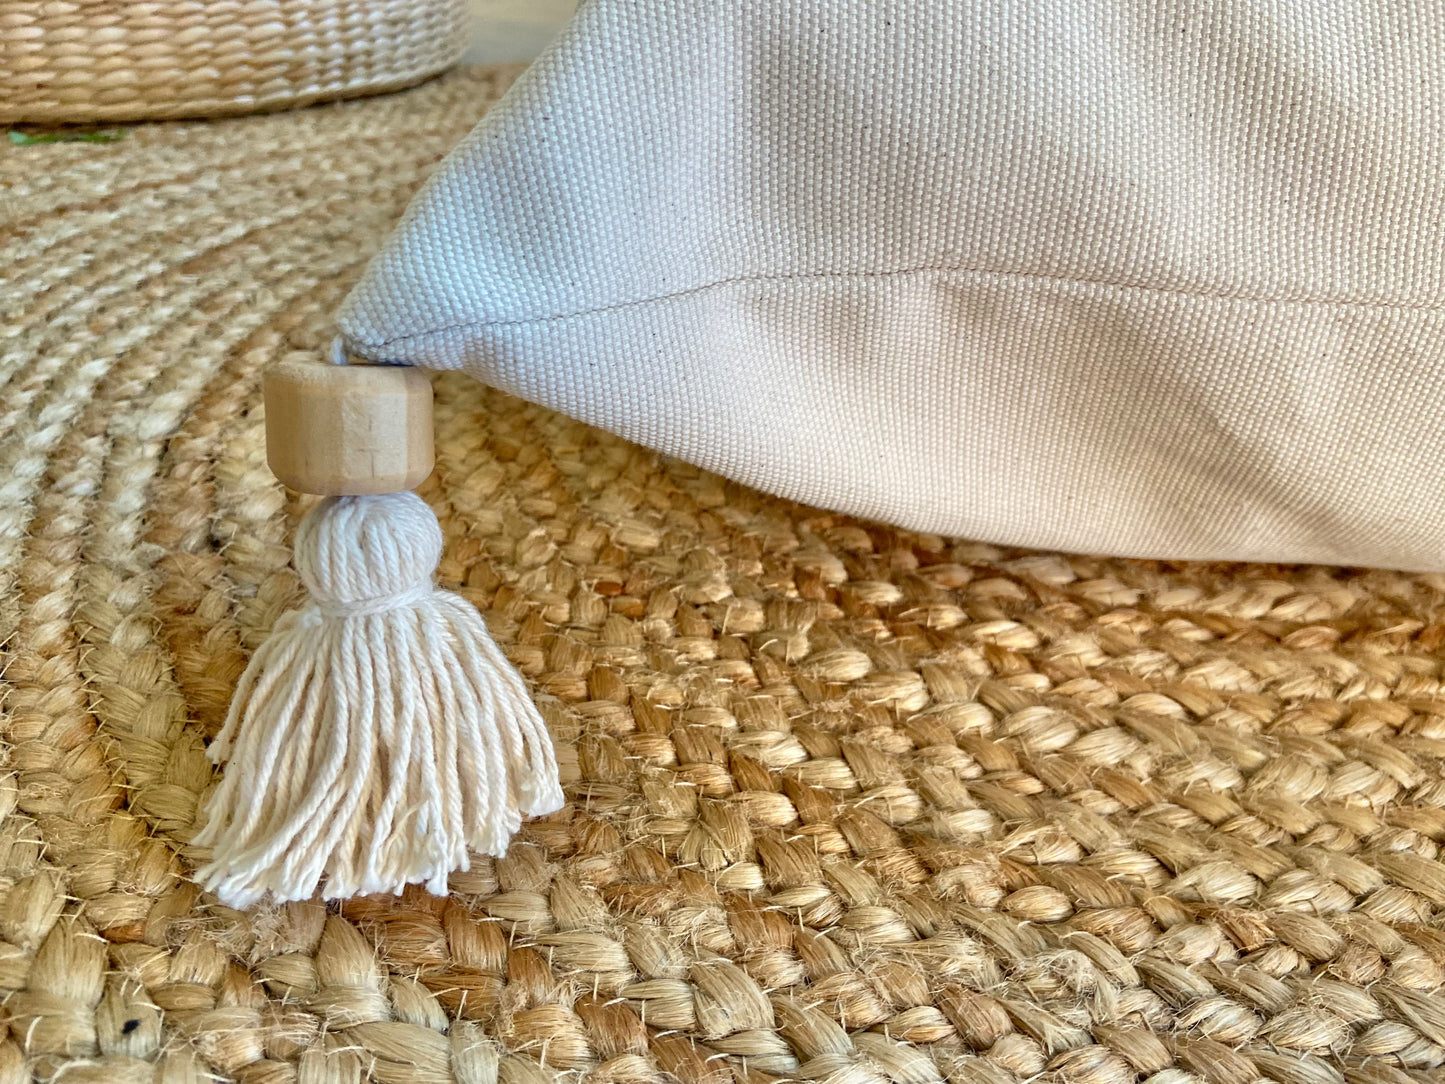 Ivory White Tassel Pillow with wood beads